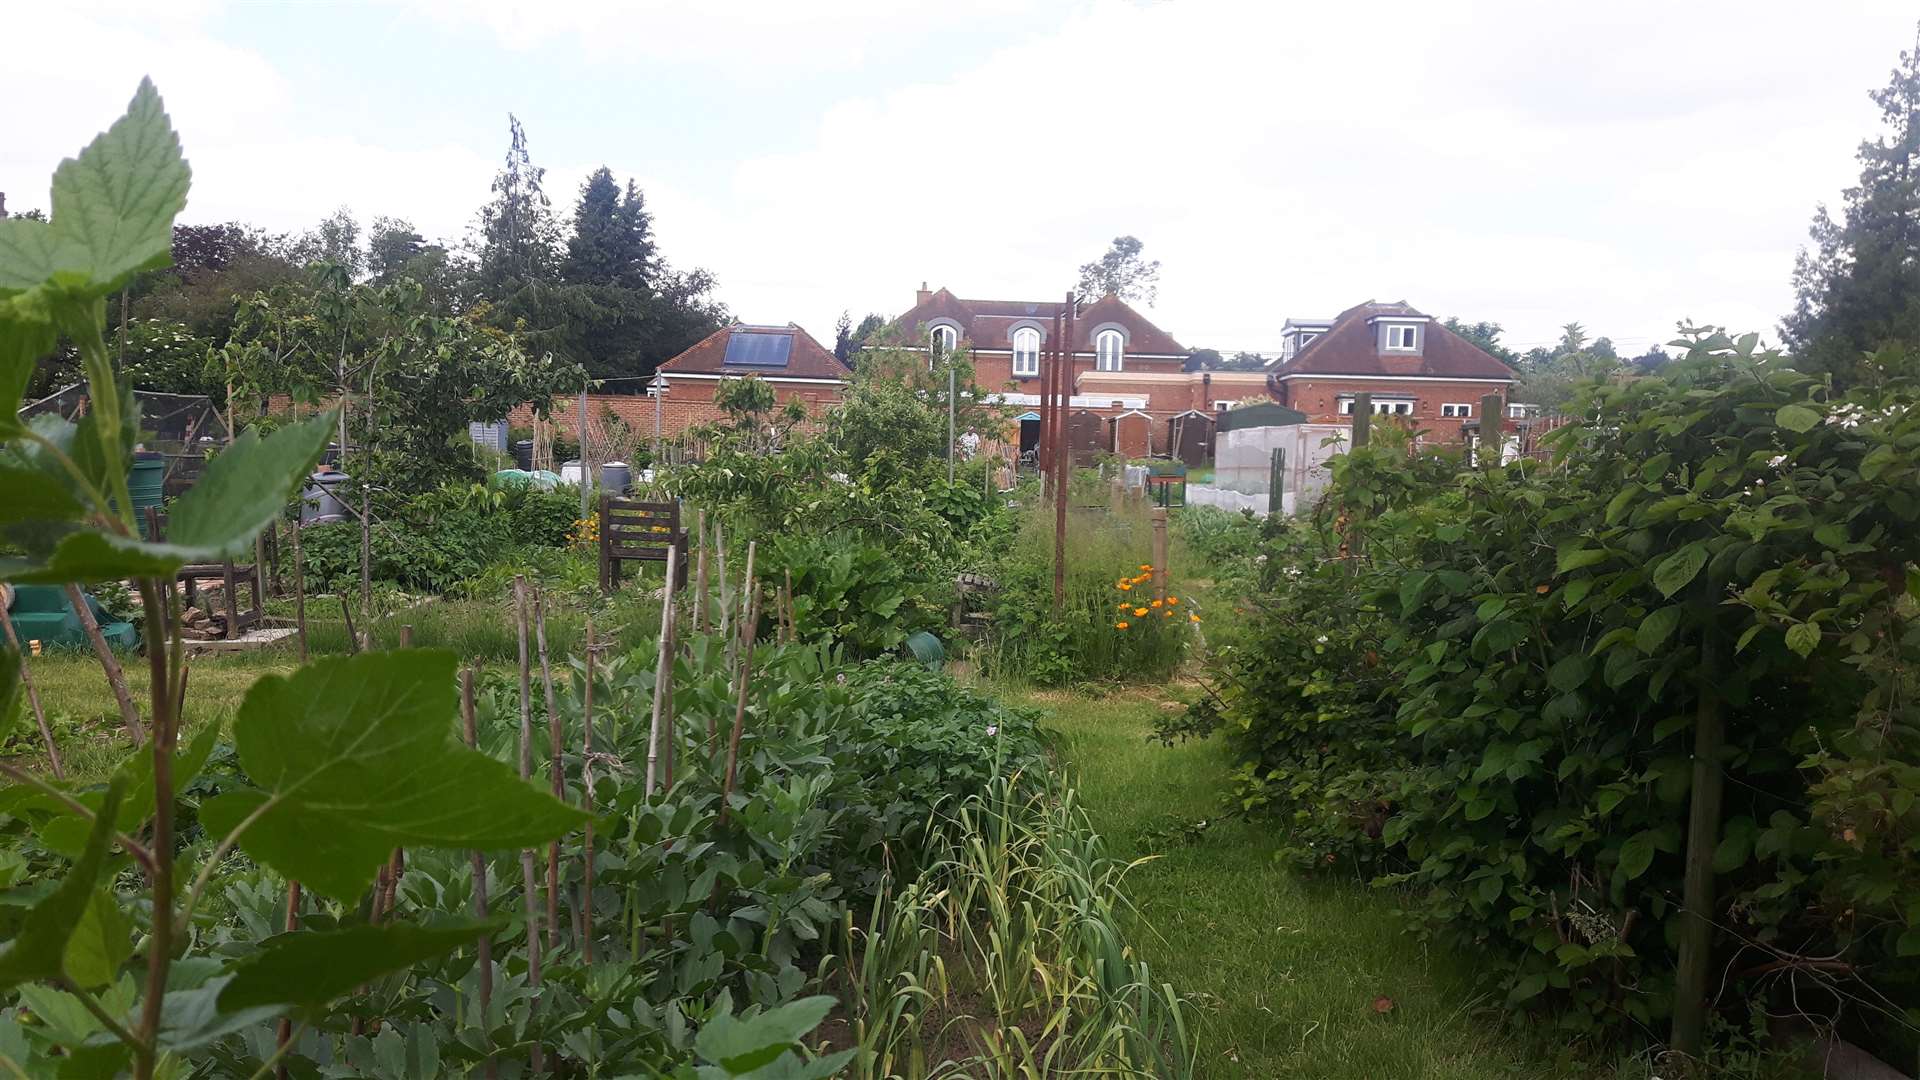 The Church Landway allotments are to stay where they are